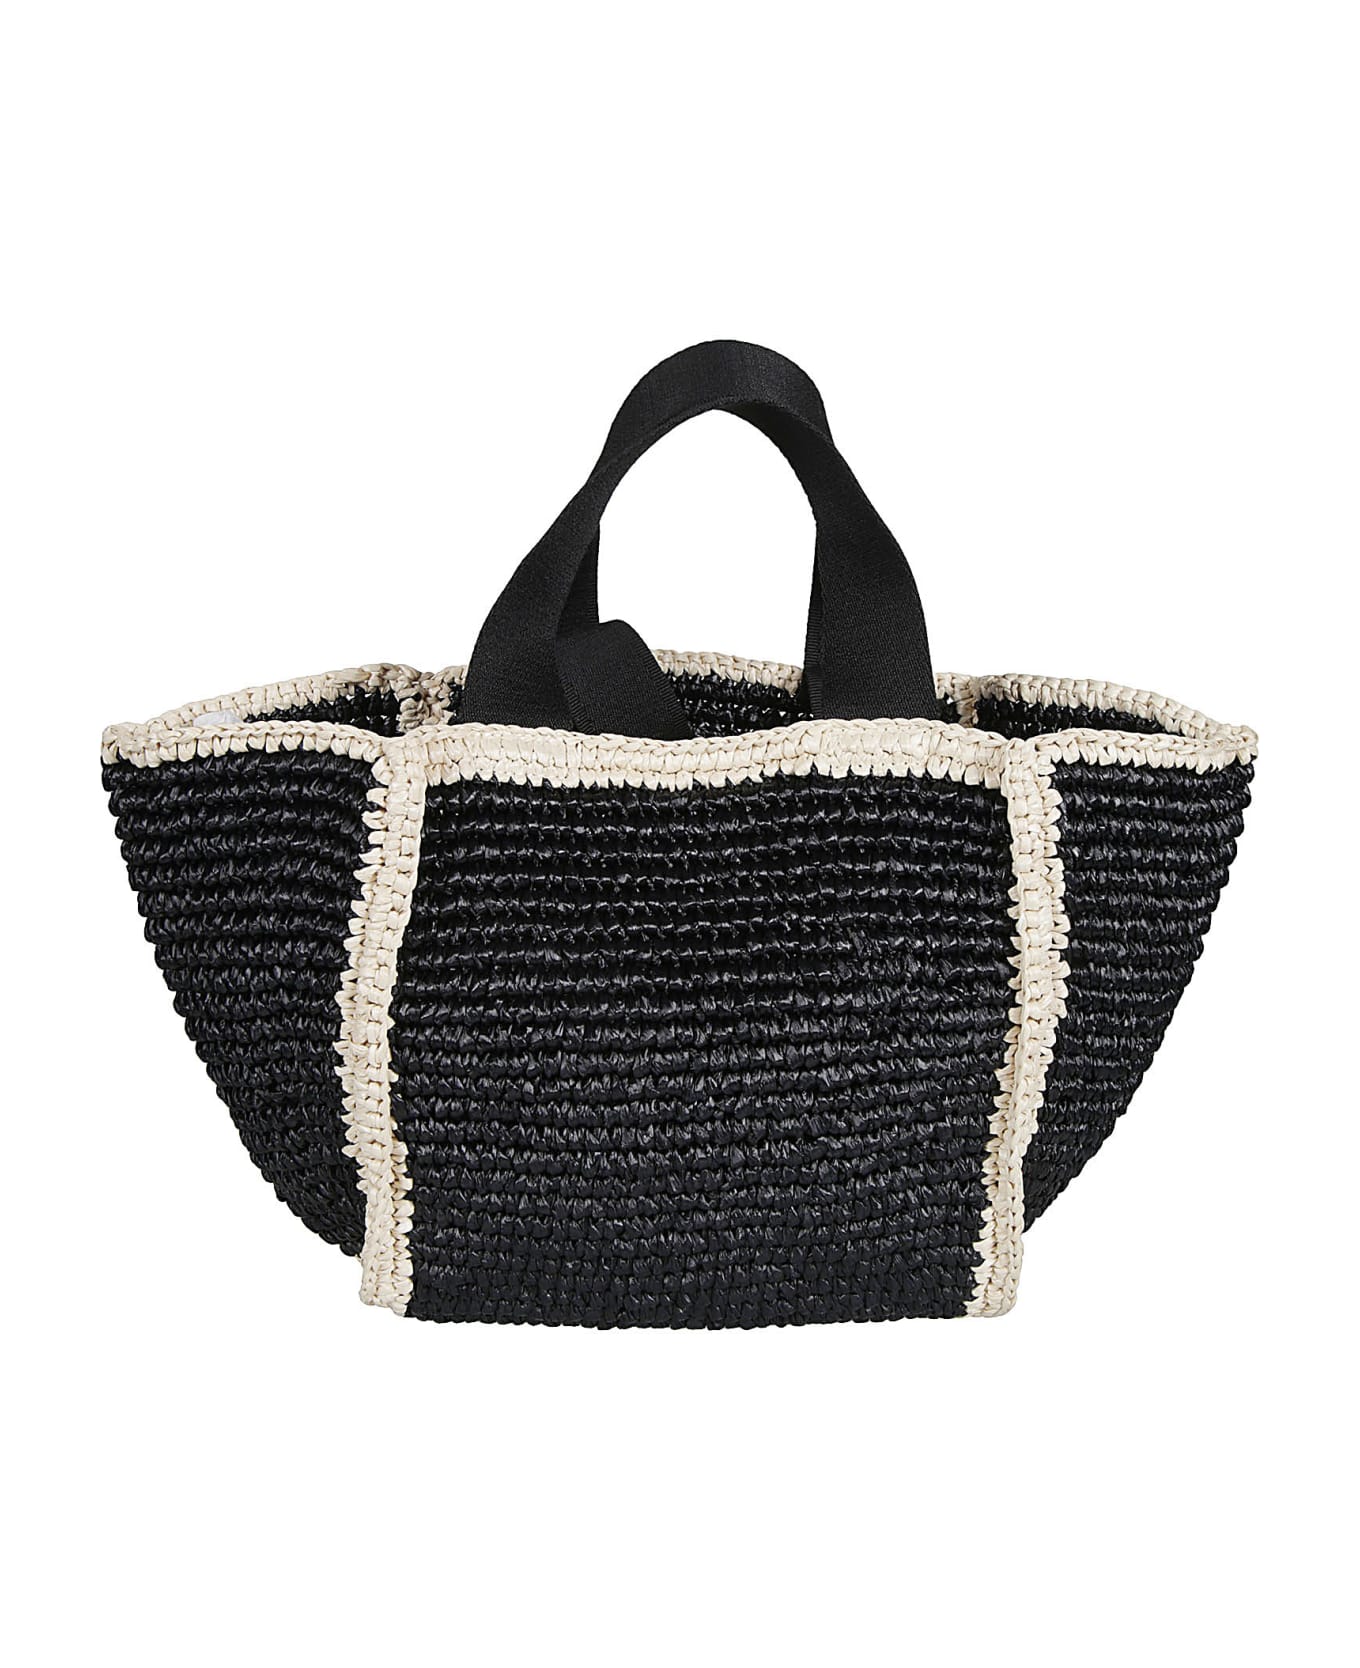 Marni Logo Embroidered Woven Top Handle Tote - Black/White トートバッグ